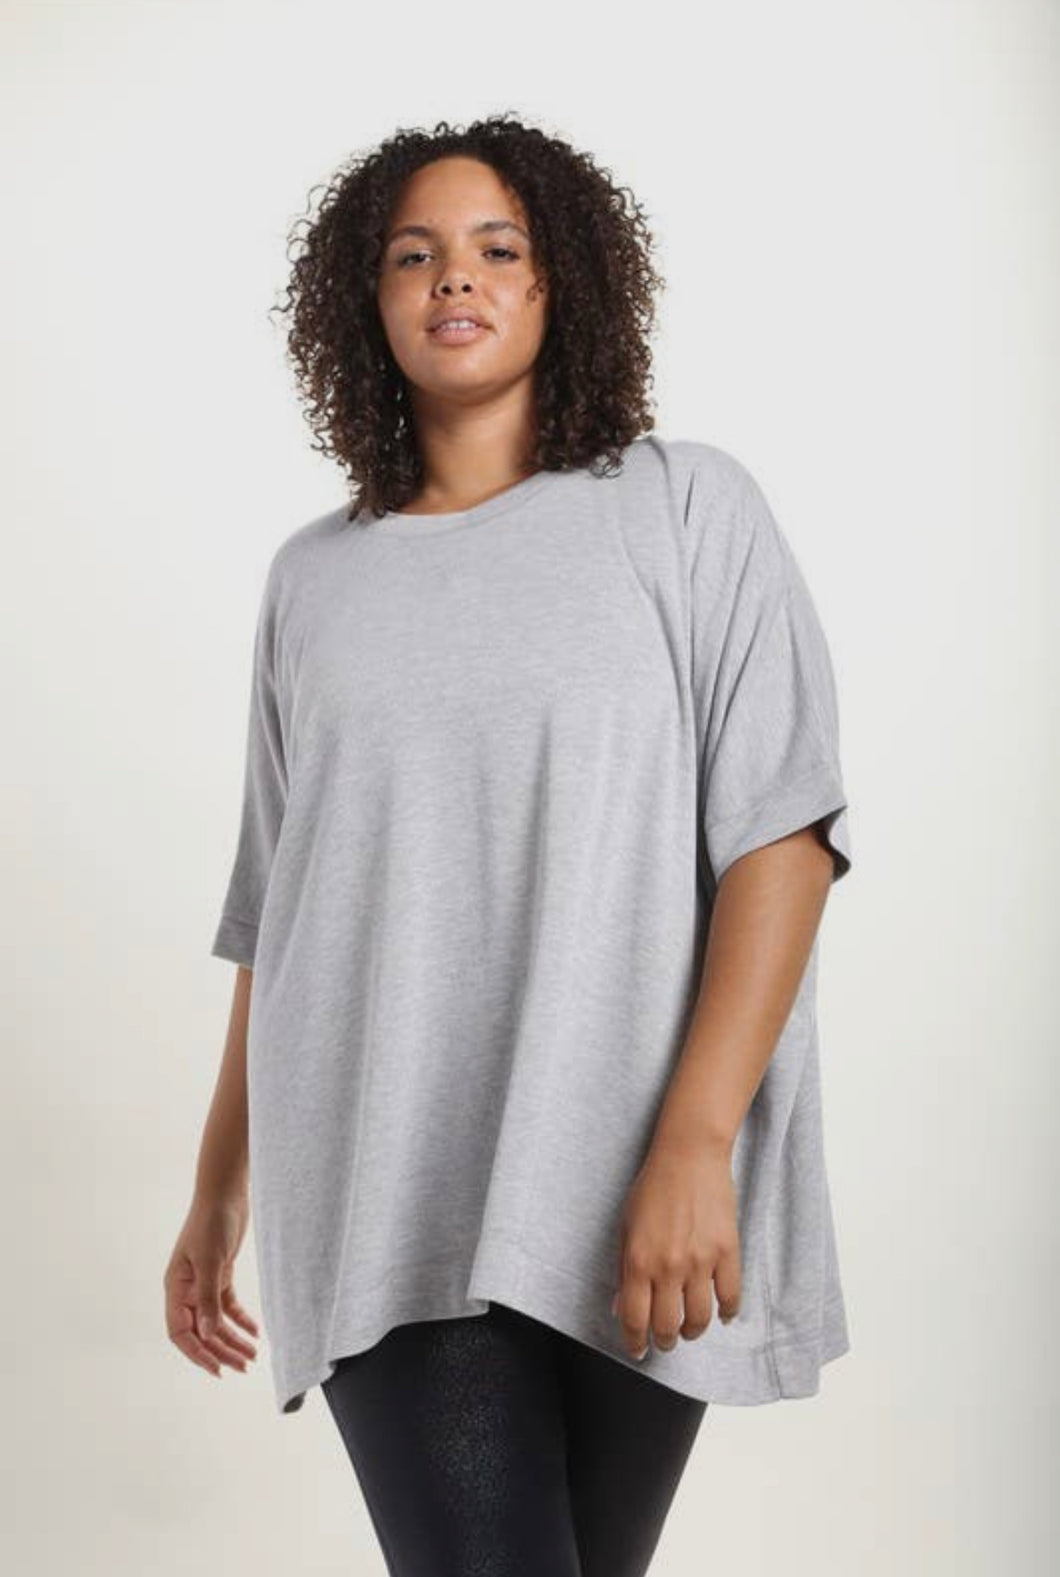 Plus Size Cape Shirt with Mid Sleeves